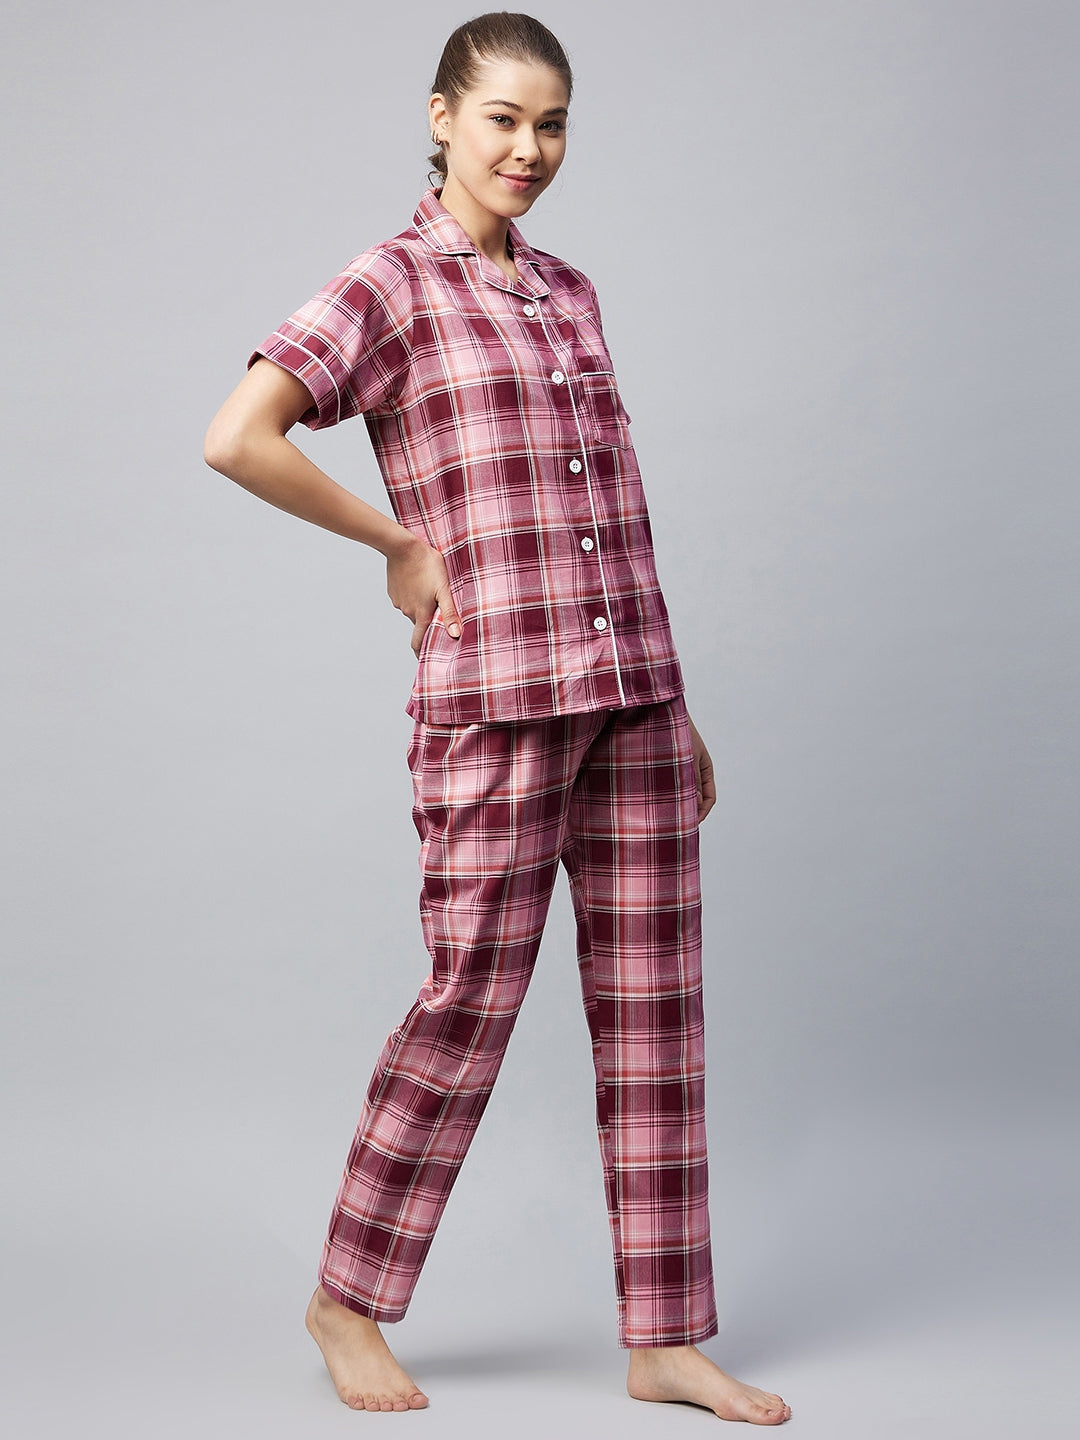 Women's Cotton Pink Checkered Night Suit